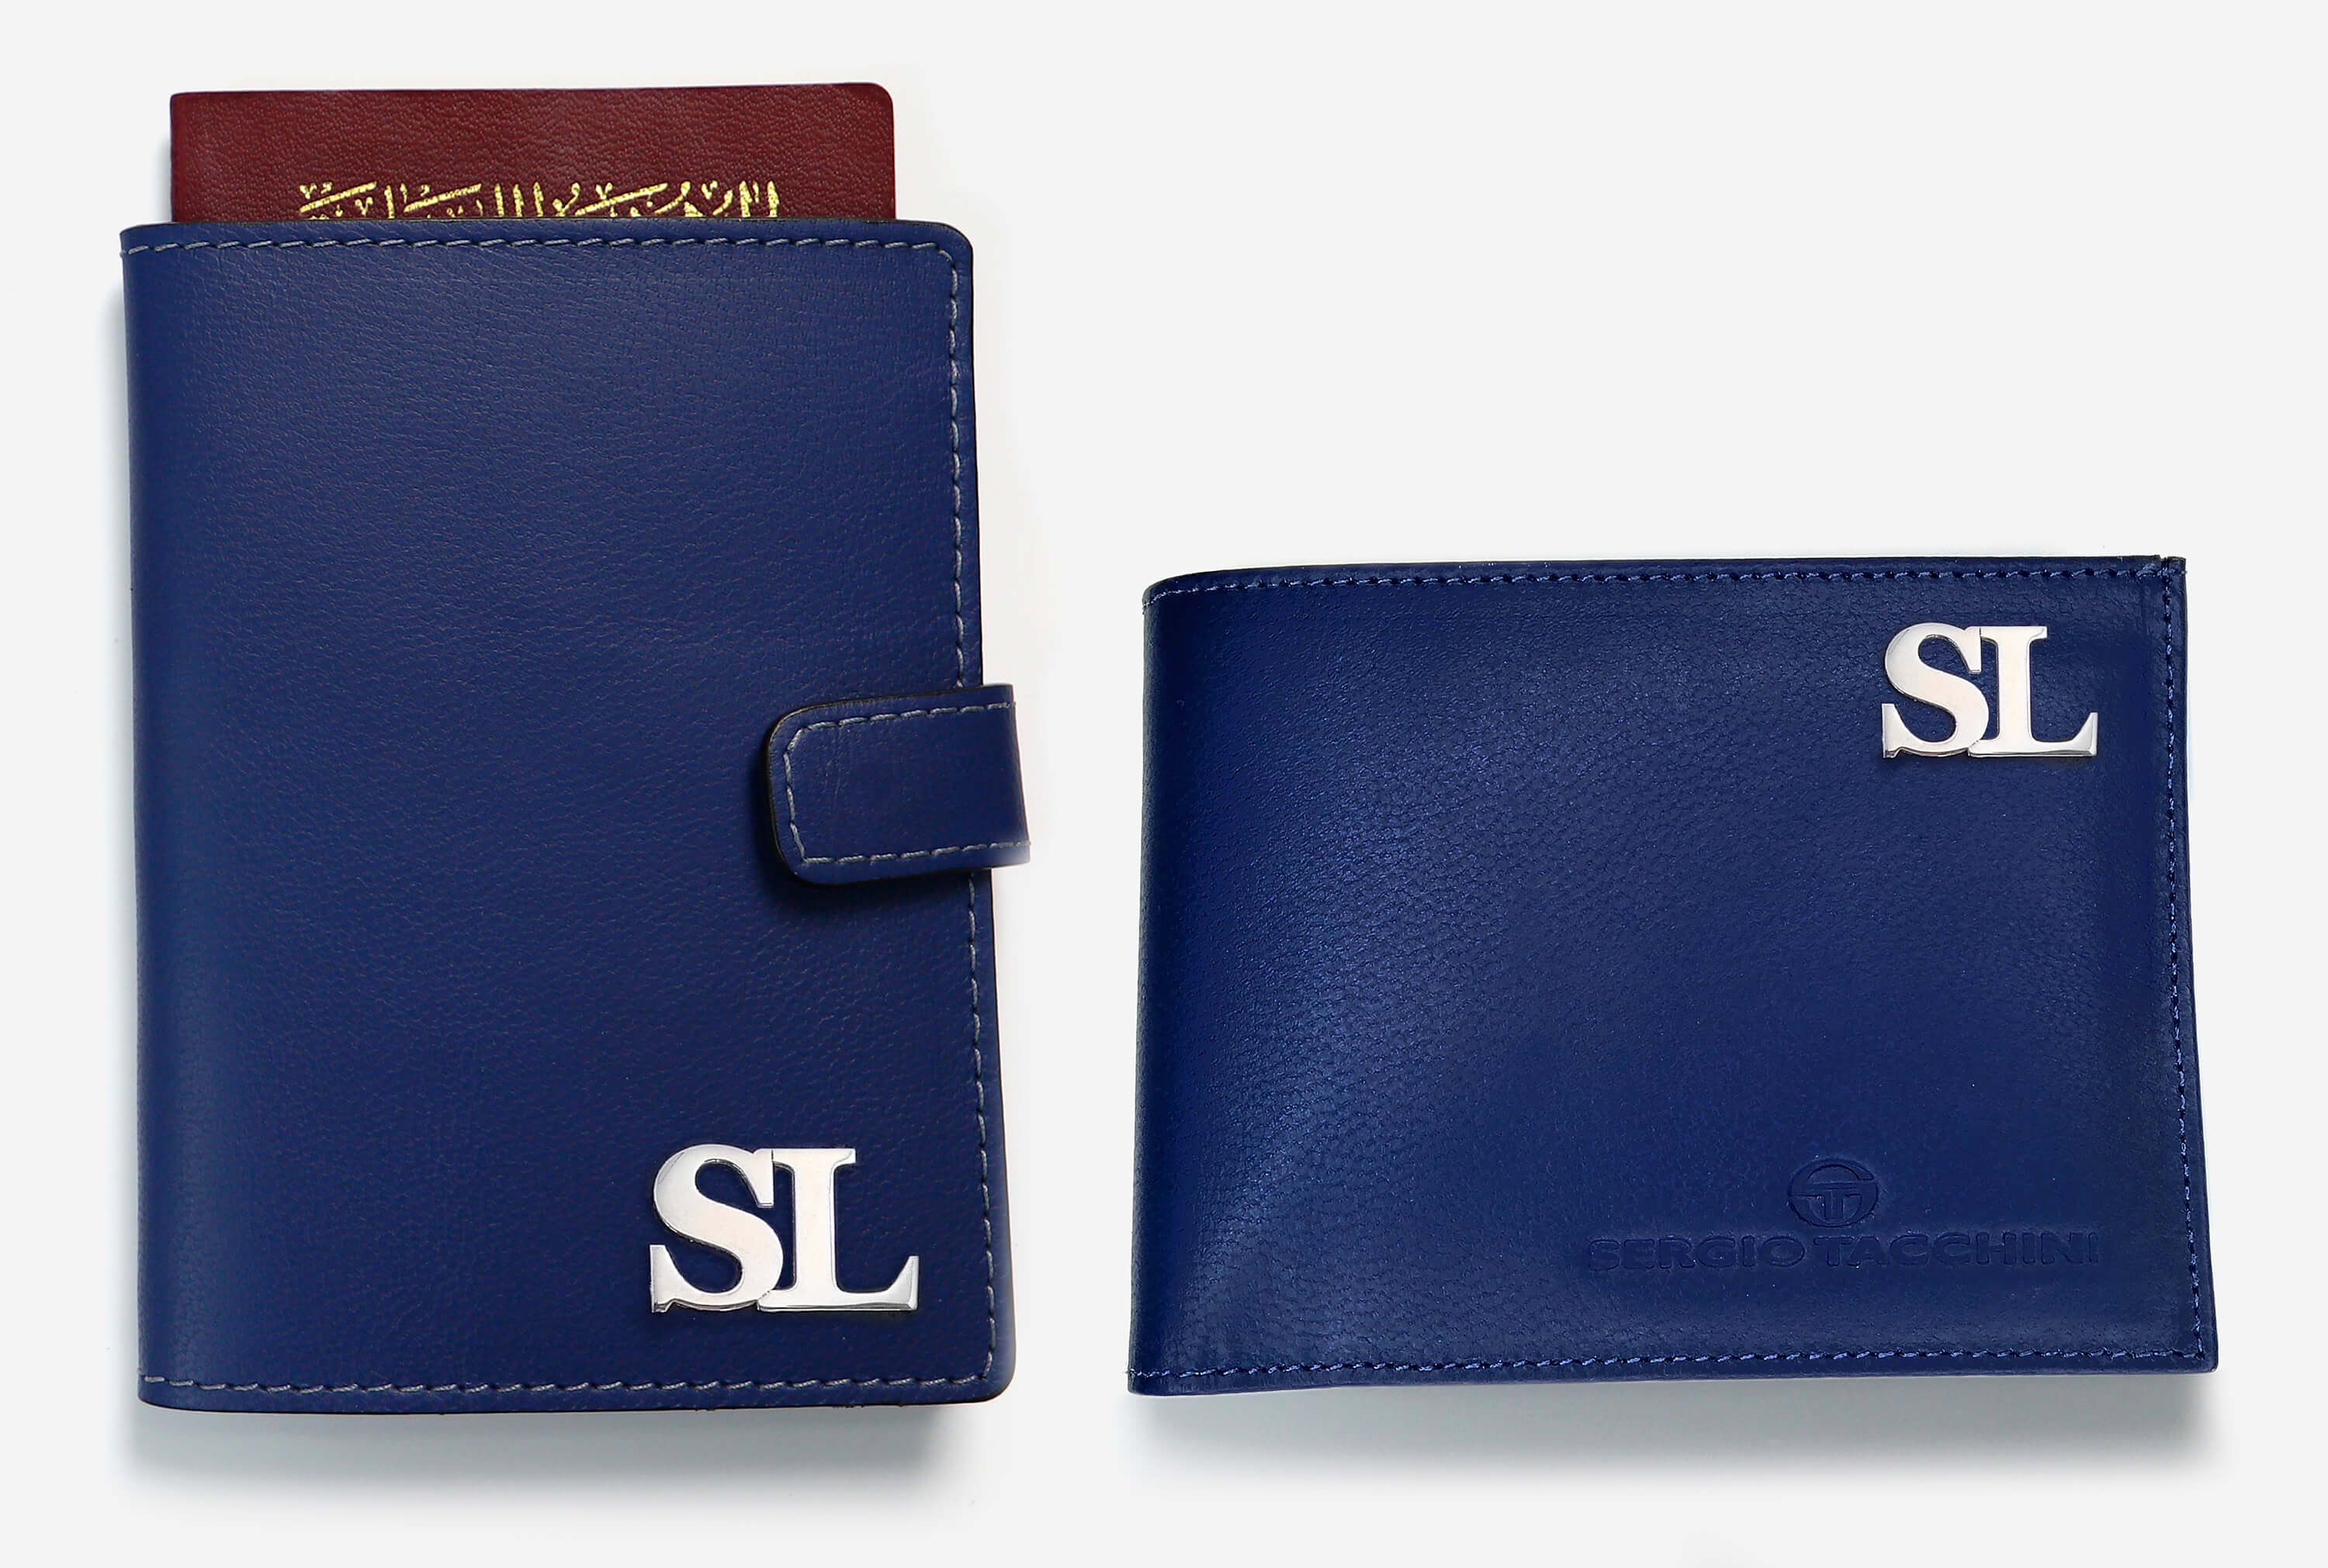 leather-passport-holder-navy-blue-with-matching-navy-blue-wallet